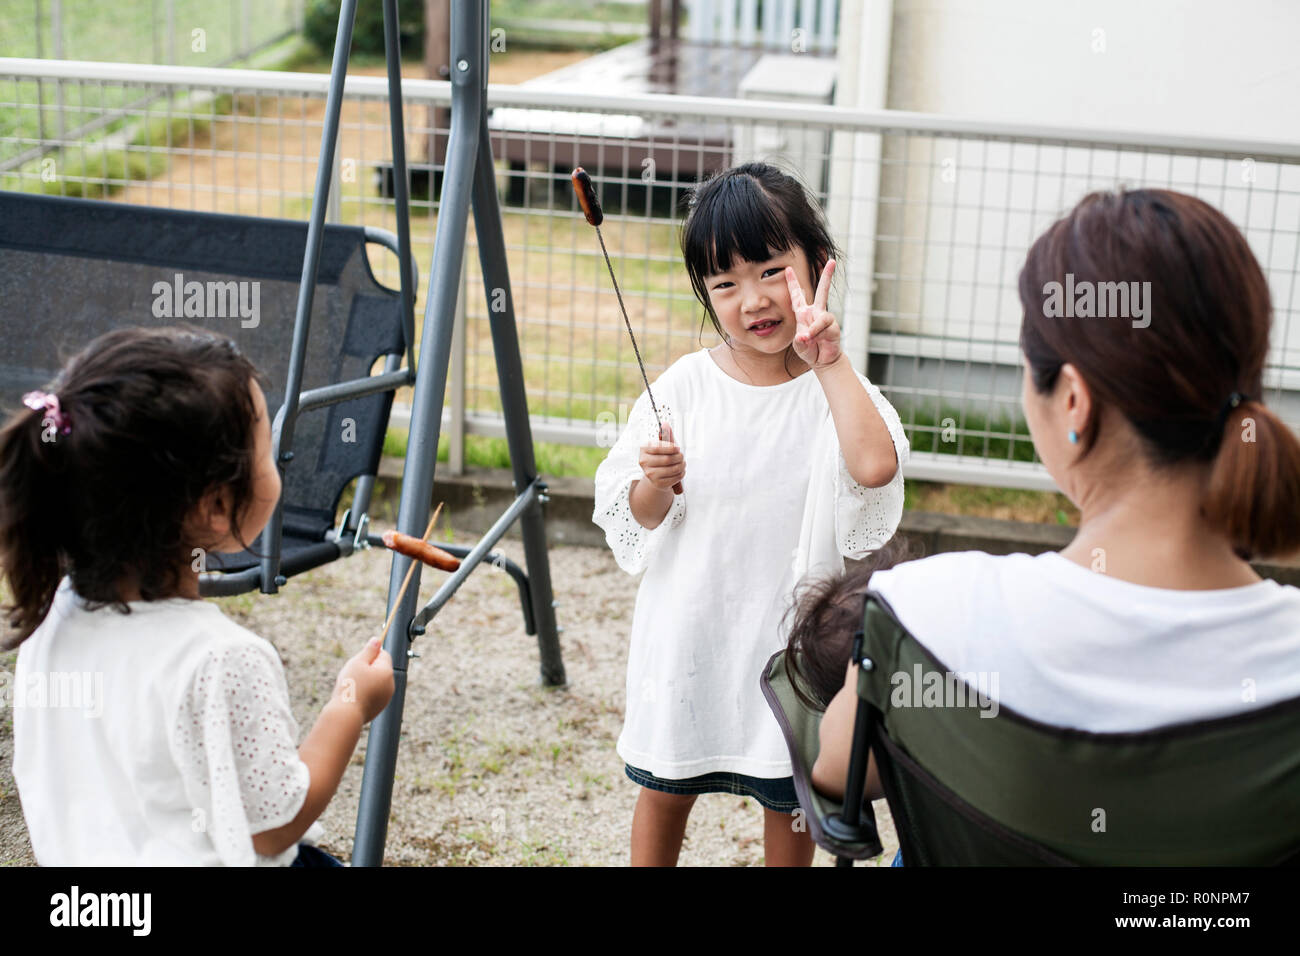 Two Japanese girls holding sausages on skewers and woman in a backyard. Stock Photo